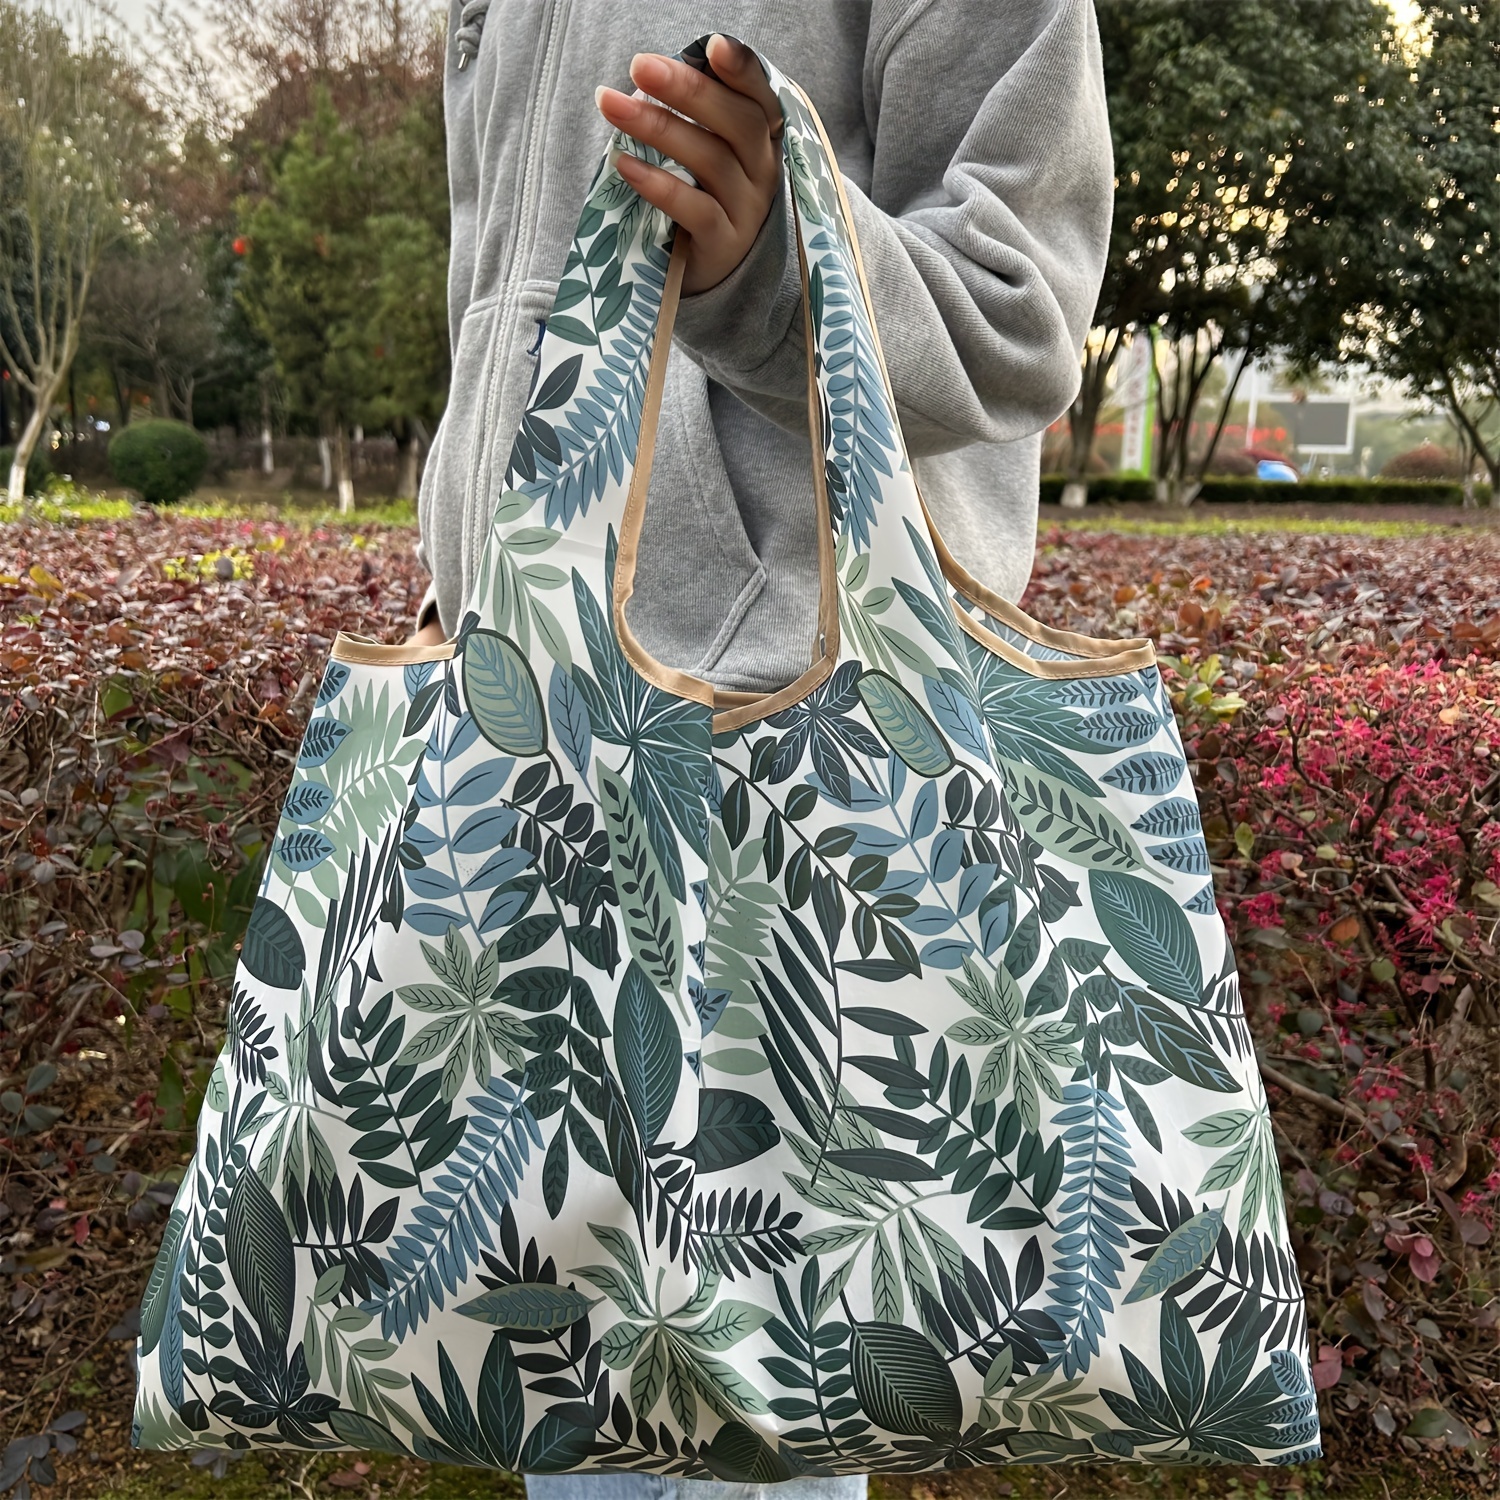 

Large Capacity Tote Bag, Lightweight Foldable Shopping Bag With Leaf Print, Handheld Reusable Grocery Bag